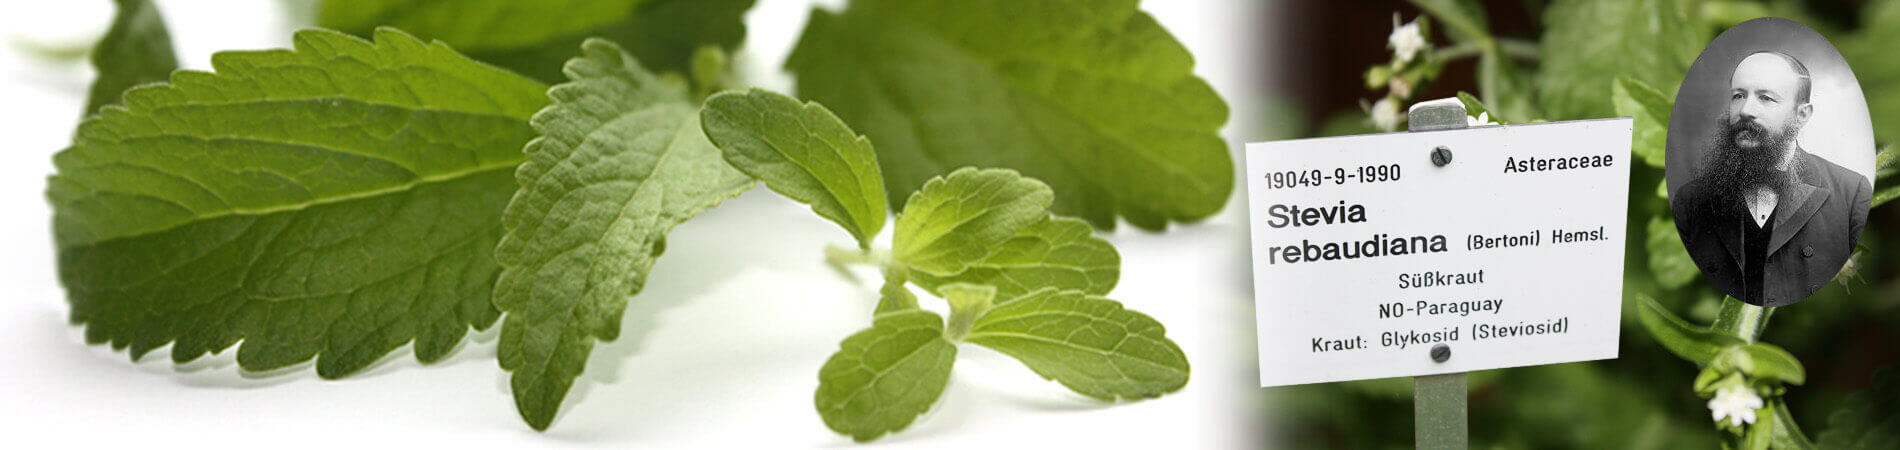 Origin and history of Stevia - Interesting facts about...